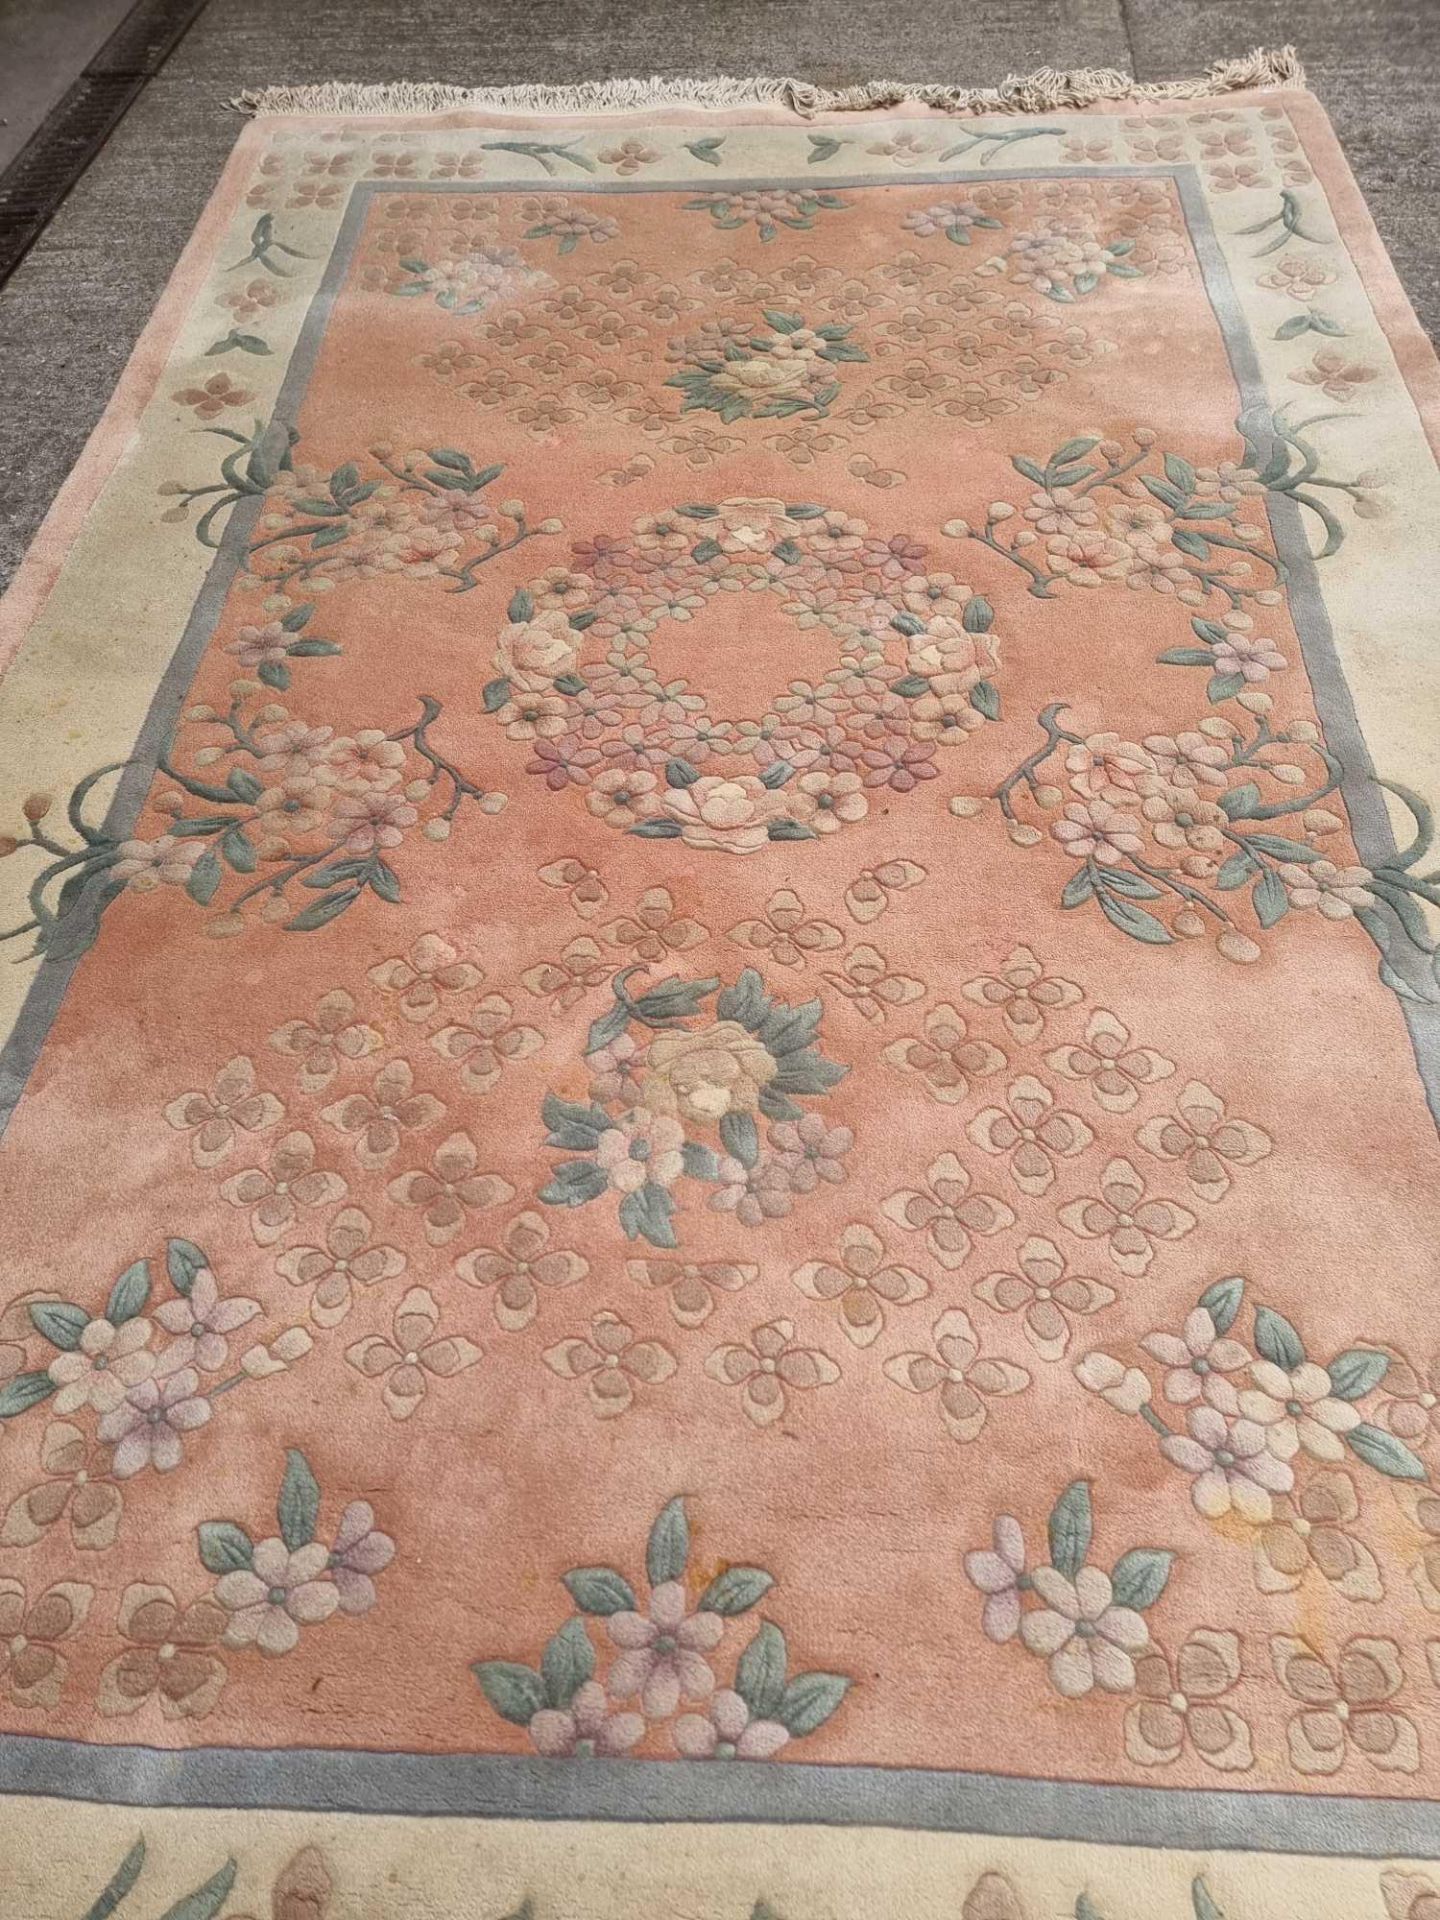 Oriental Style Thick Pile Wool Rug Woven In Pastel Floral Tones On Pale Pink Ground 268 x 180cm - Bild 3 aus 5